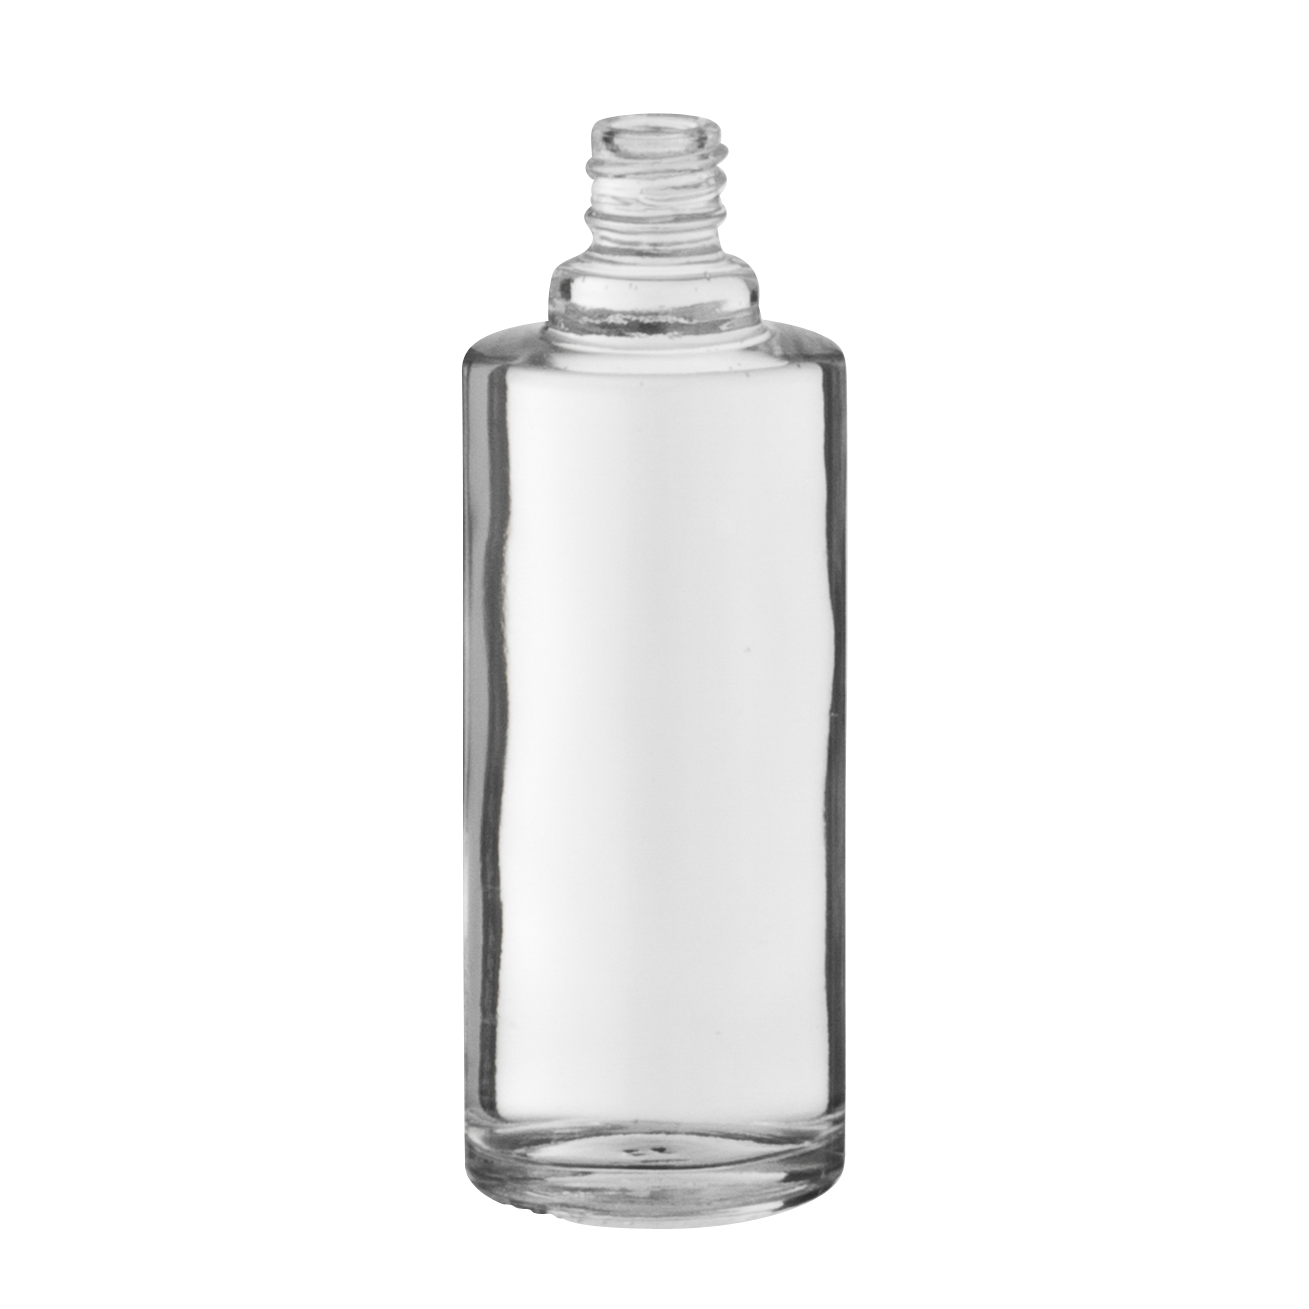 container in glass round bouillotte bottle 50ml eur 4 flint glass